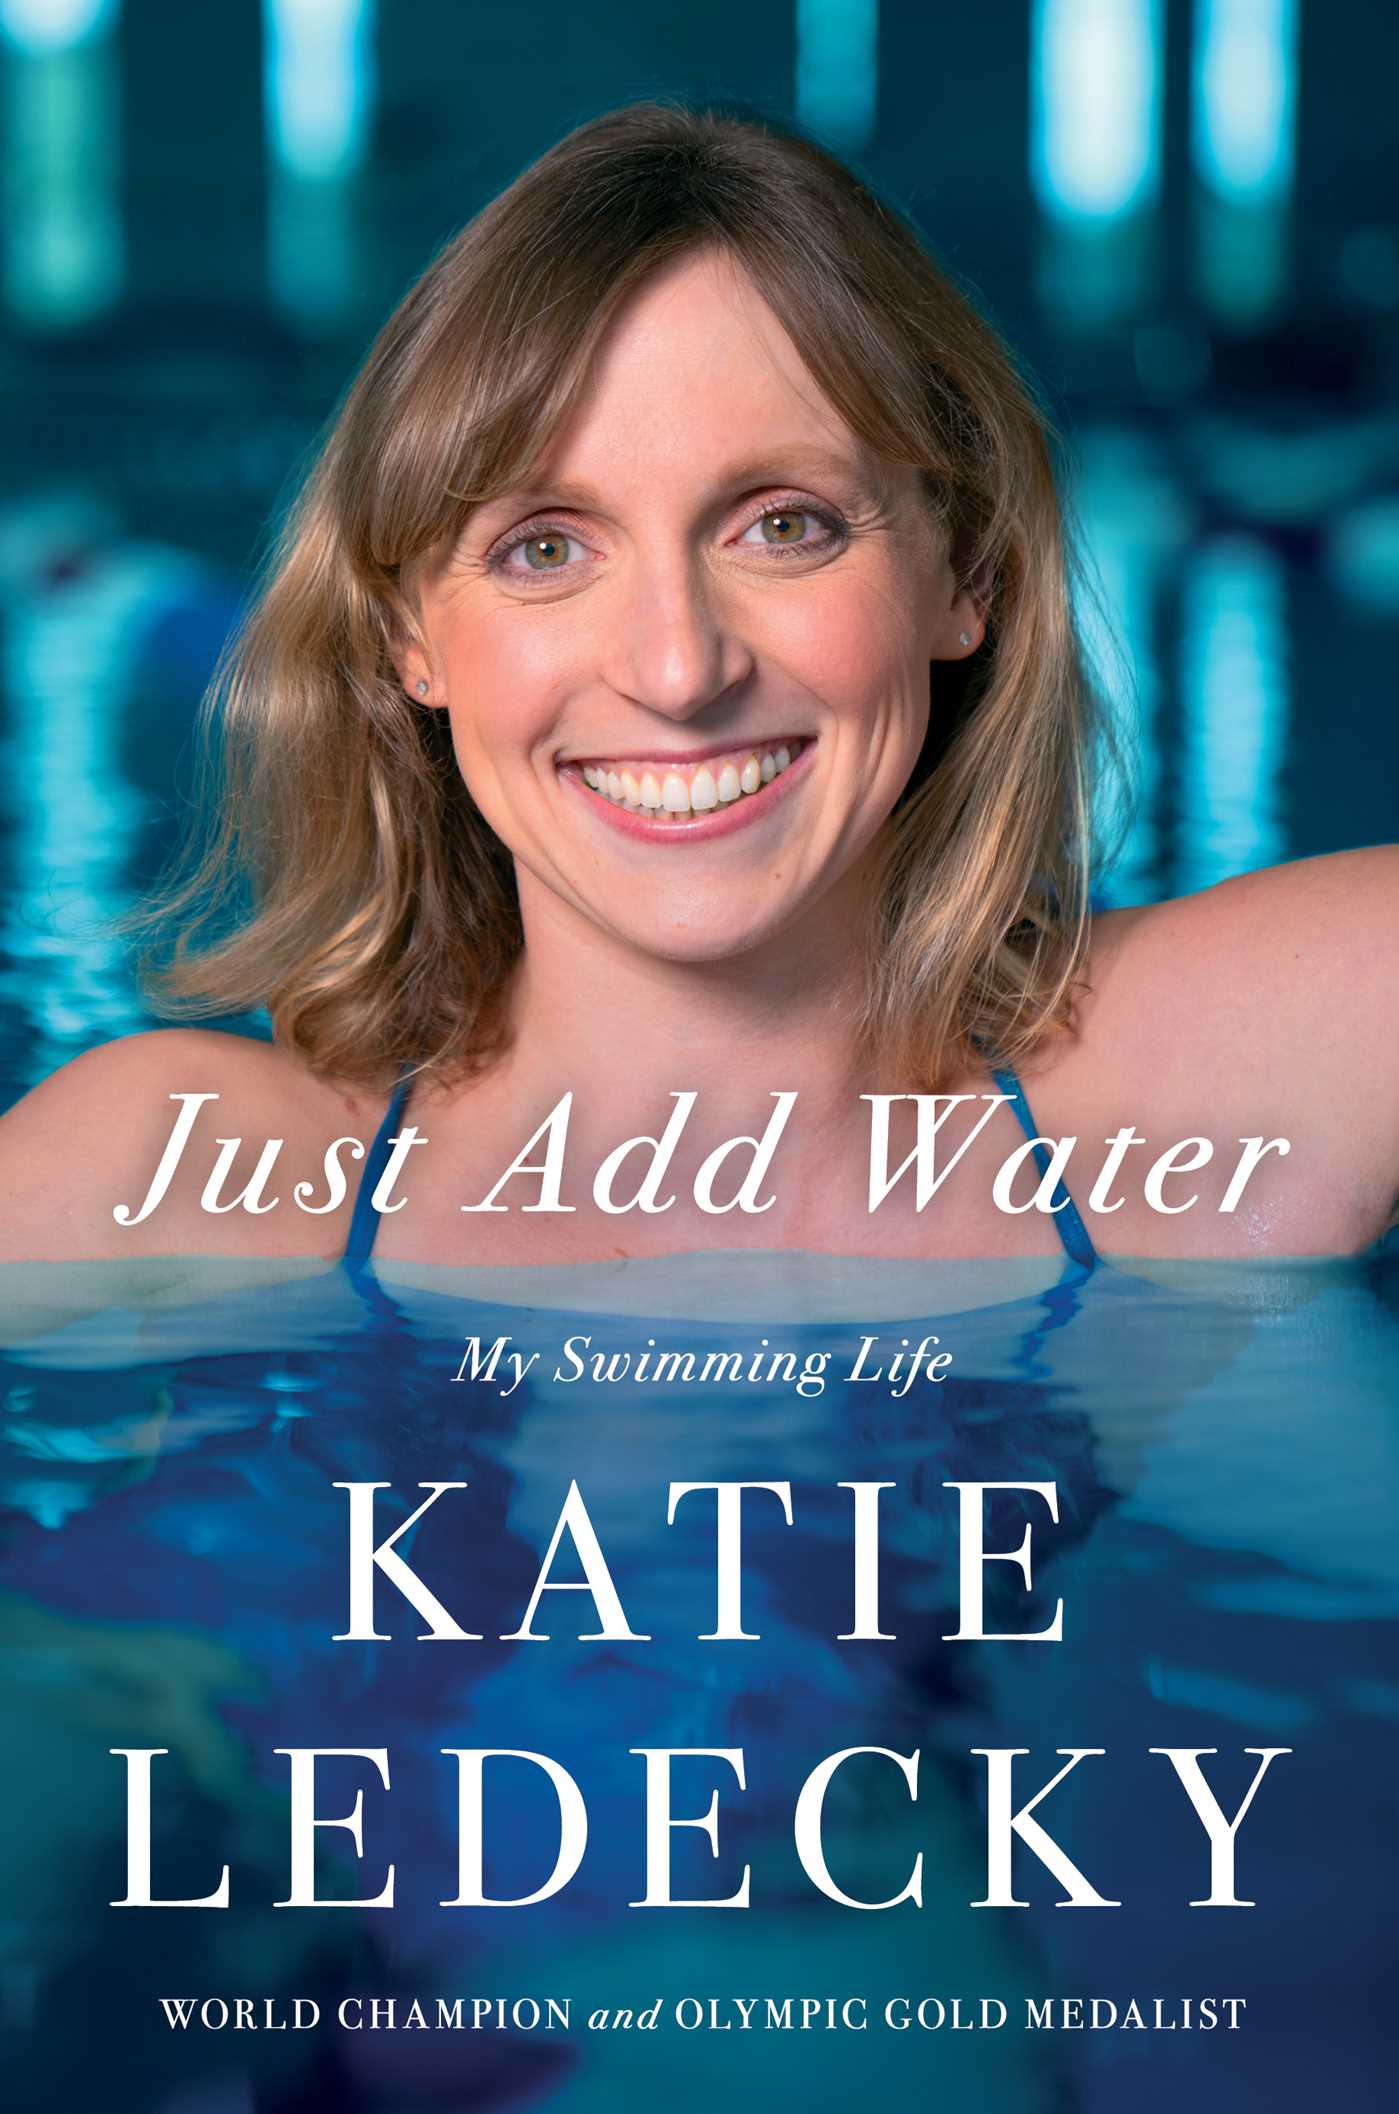 Image for "Just Add Water"